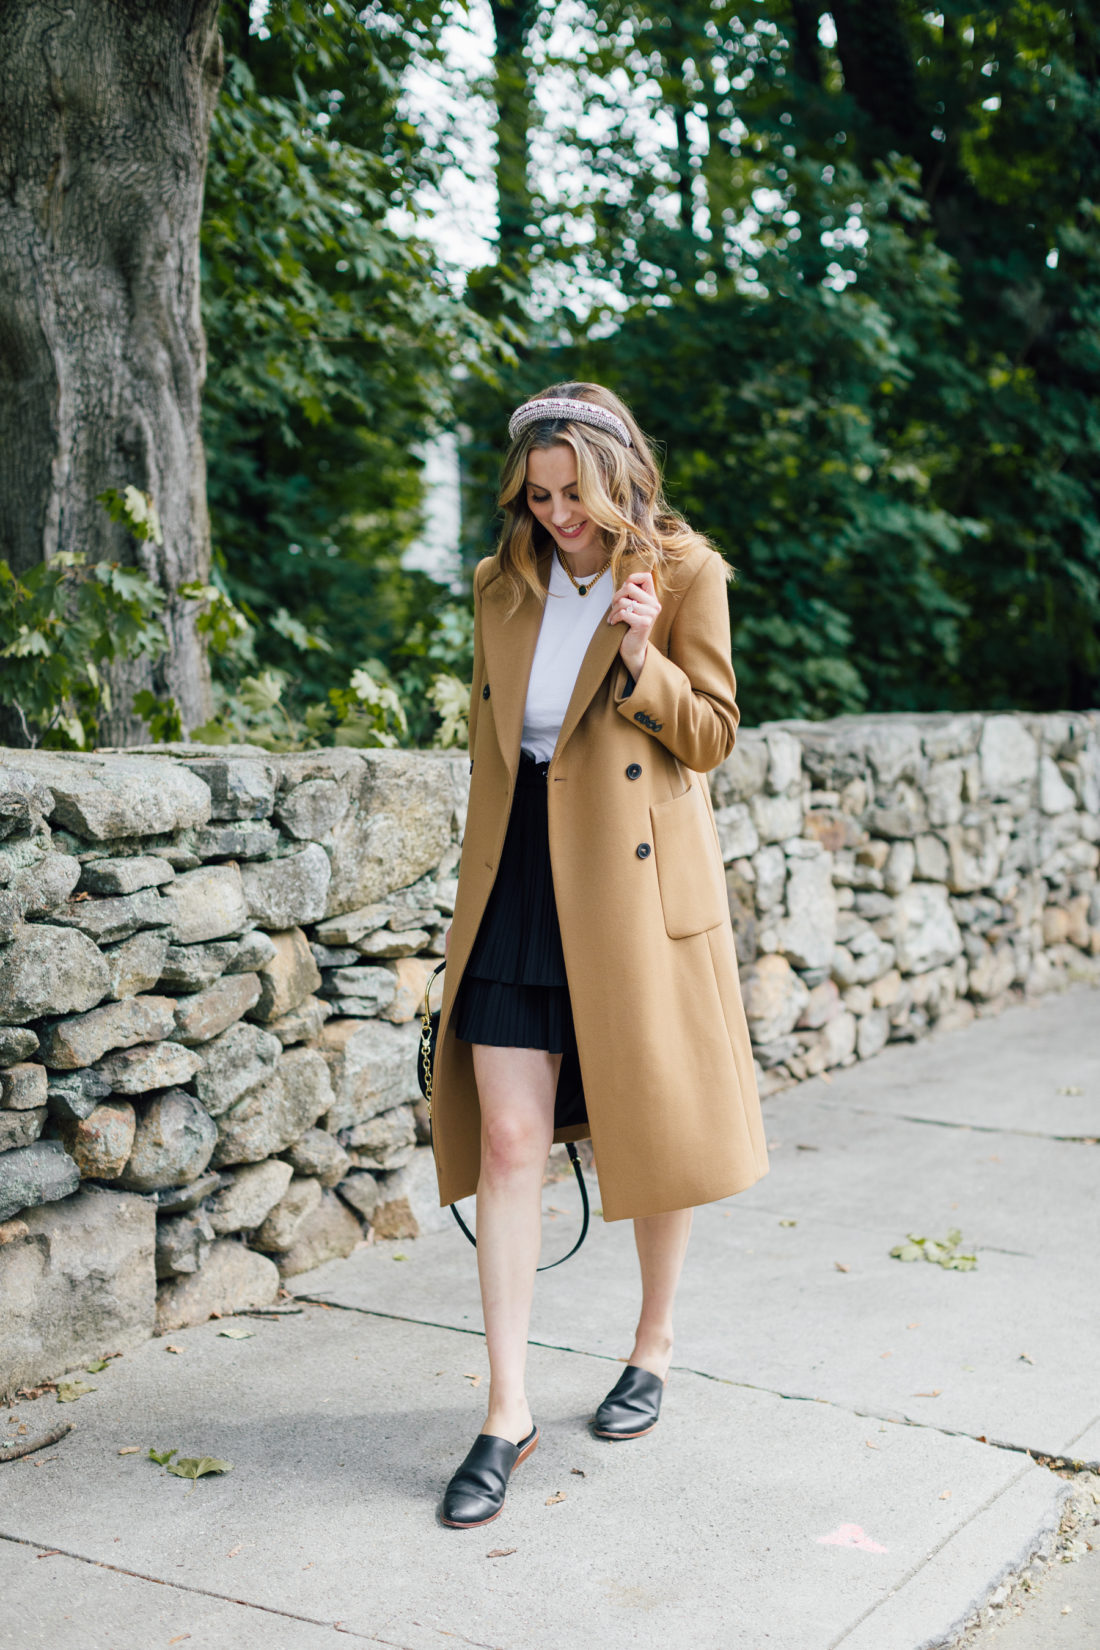 Eva Amurri Martino wears a camel coat, a black skirt and a white top as a neutral color palette